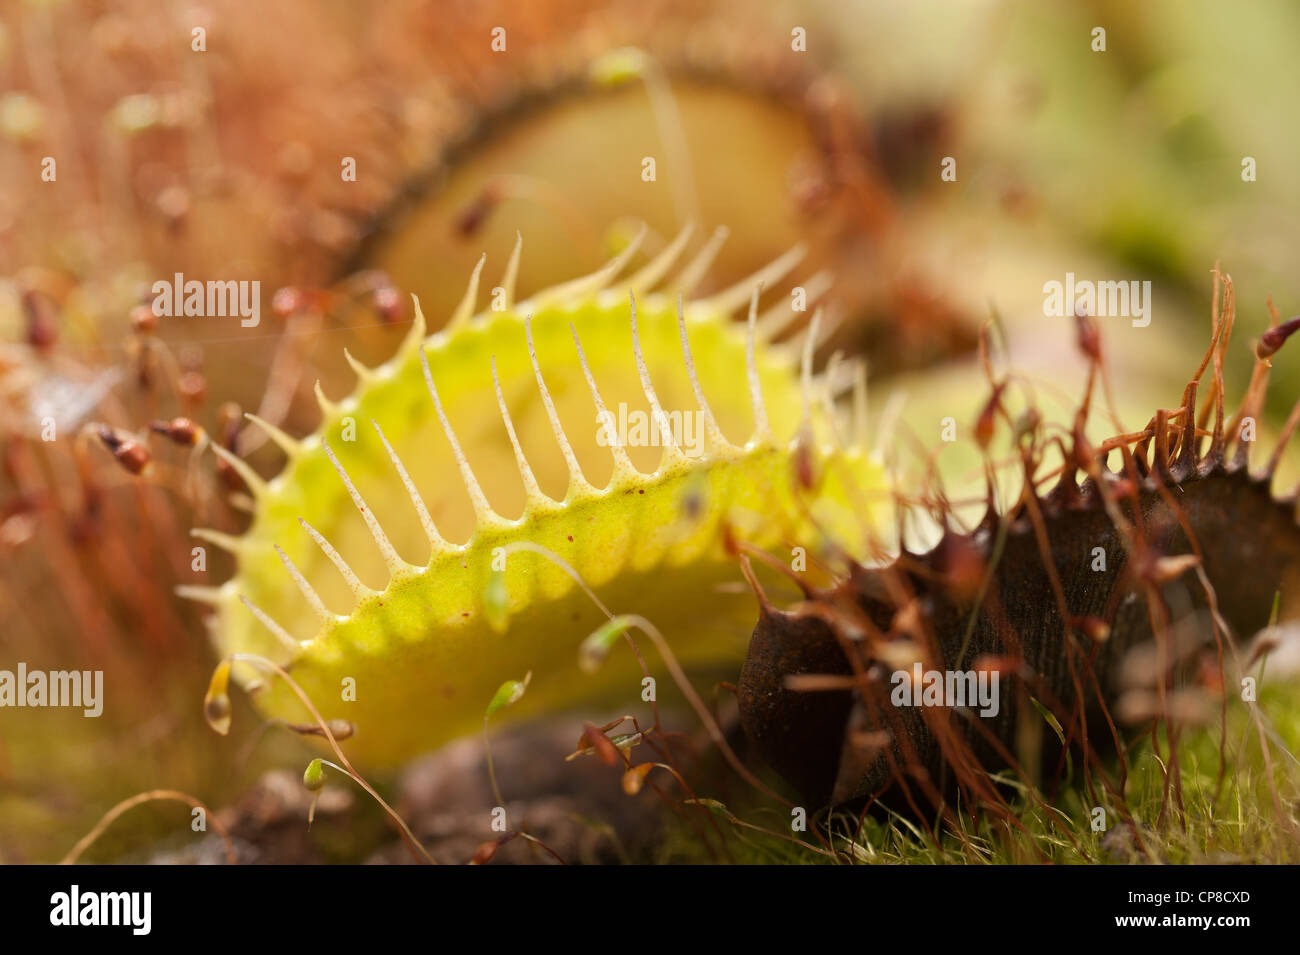 Venus fly trap insectivorous plant gets nitrates from digesting flies insects Stock Photo